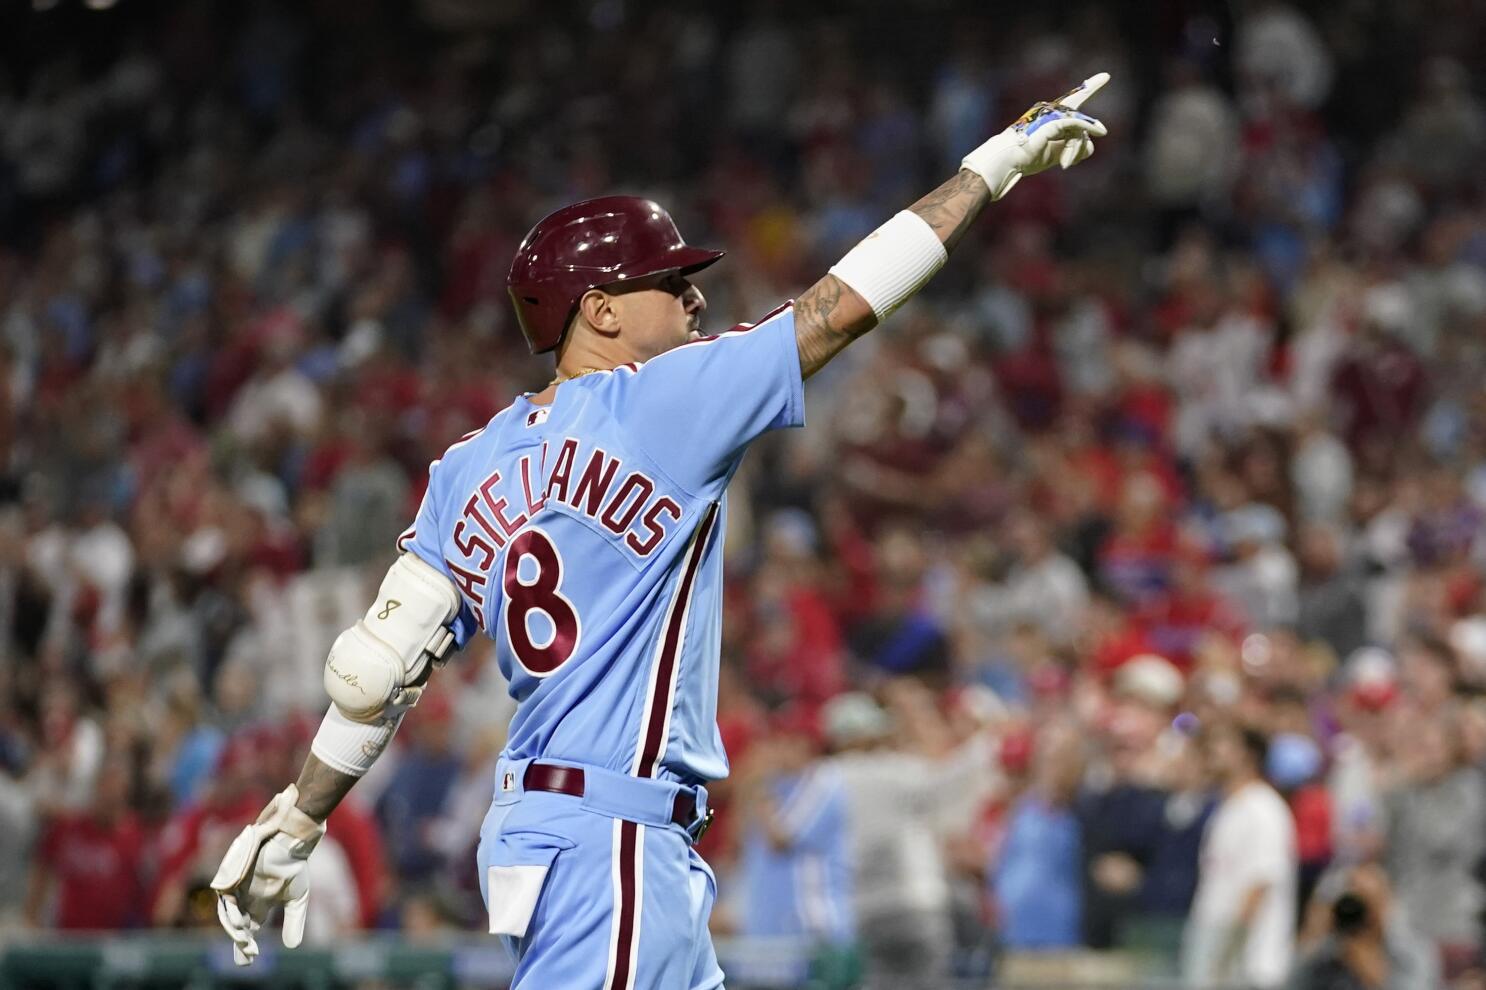 Castellanos drives in 4 to set single-season career-best of 103 RBIs as  Phillies top Mets 5-4 - The San Diego Union-Tribune